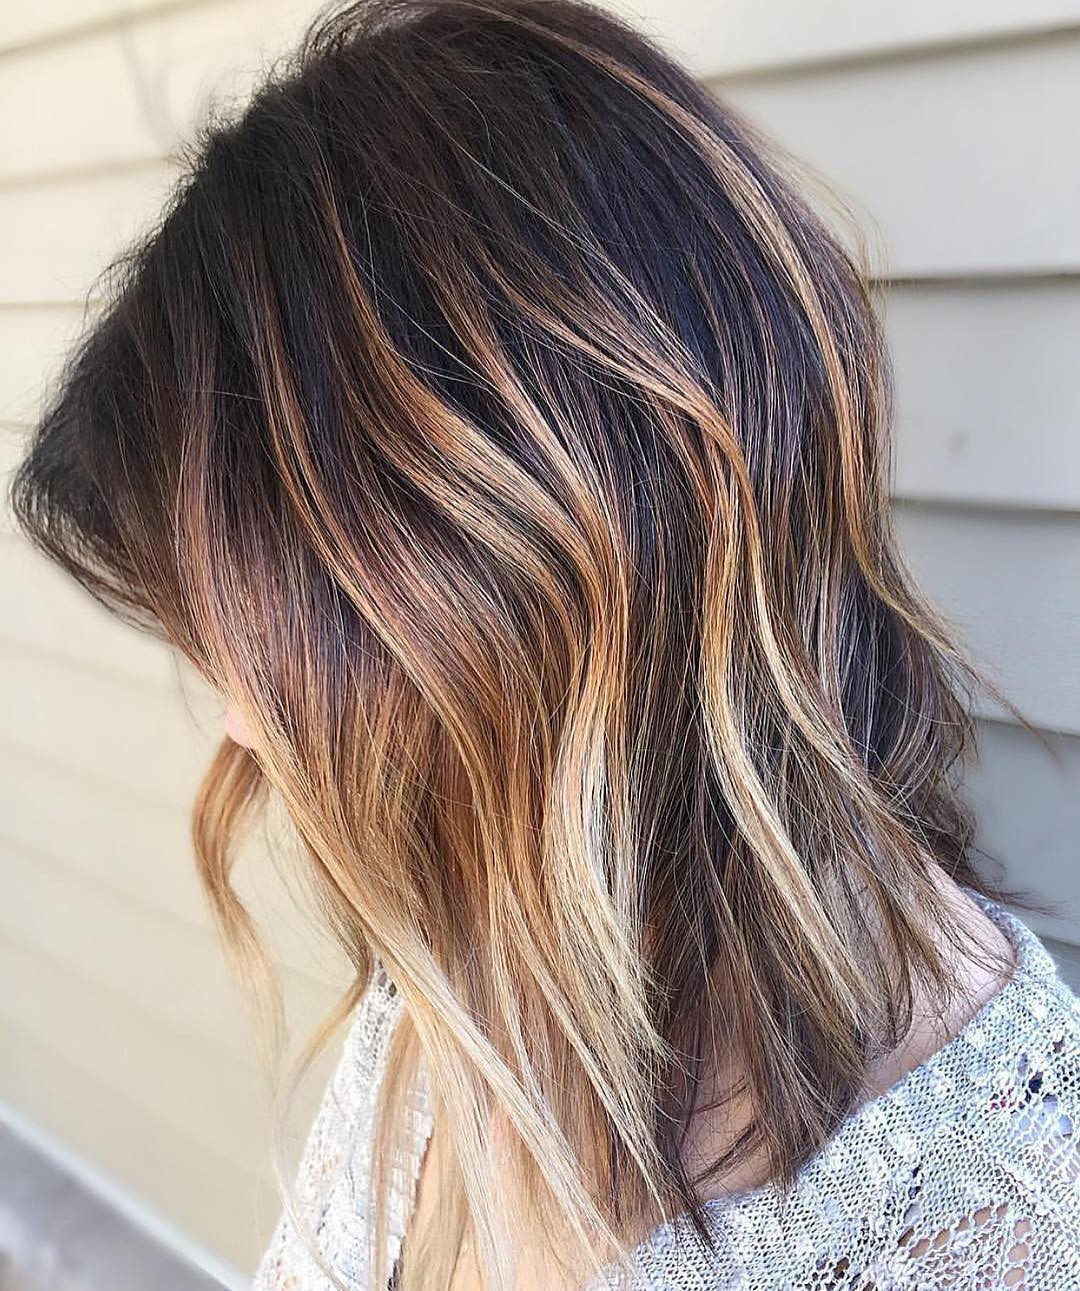 Hairstyles And Colors For Medium Length Hair
 10 Medium Length Hair Color Ideas 2020